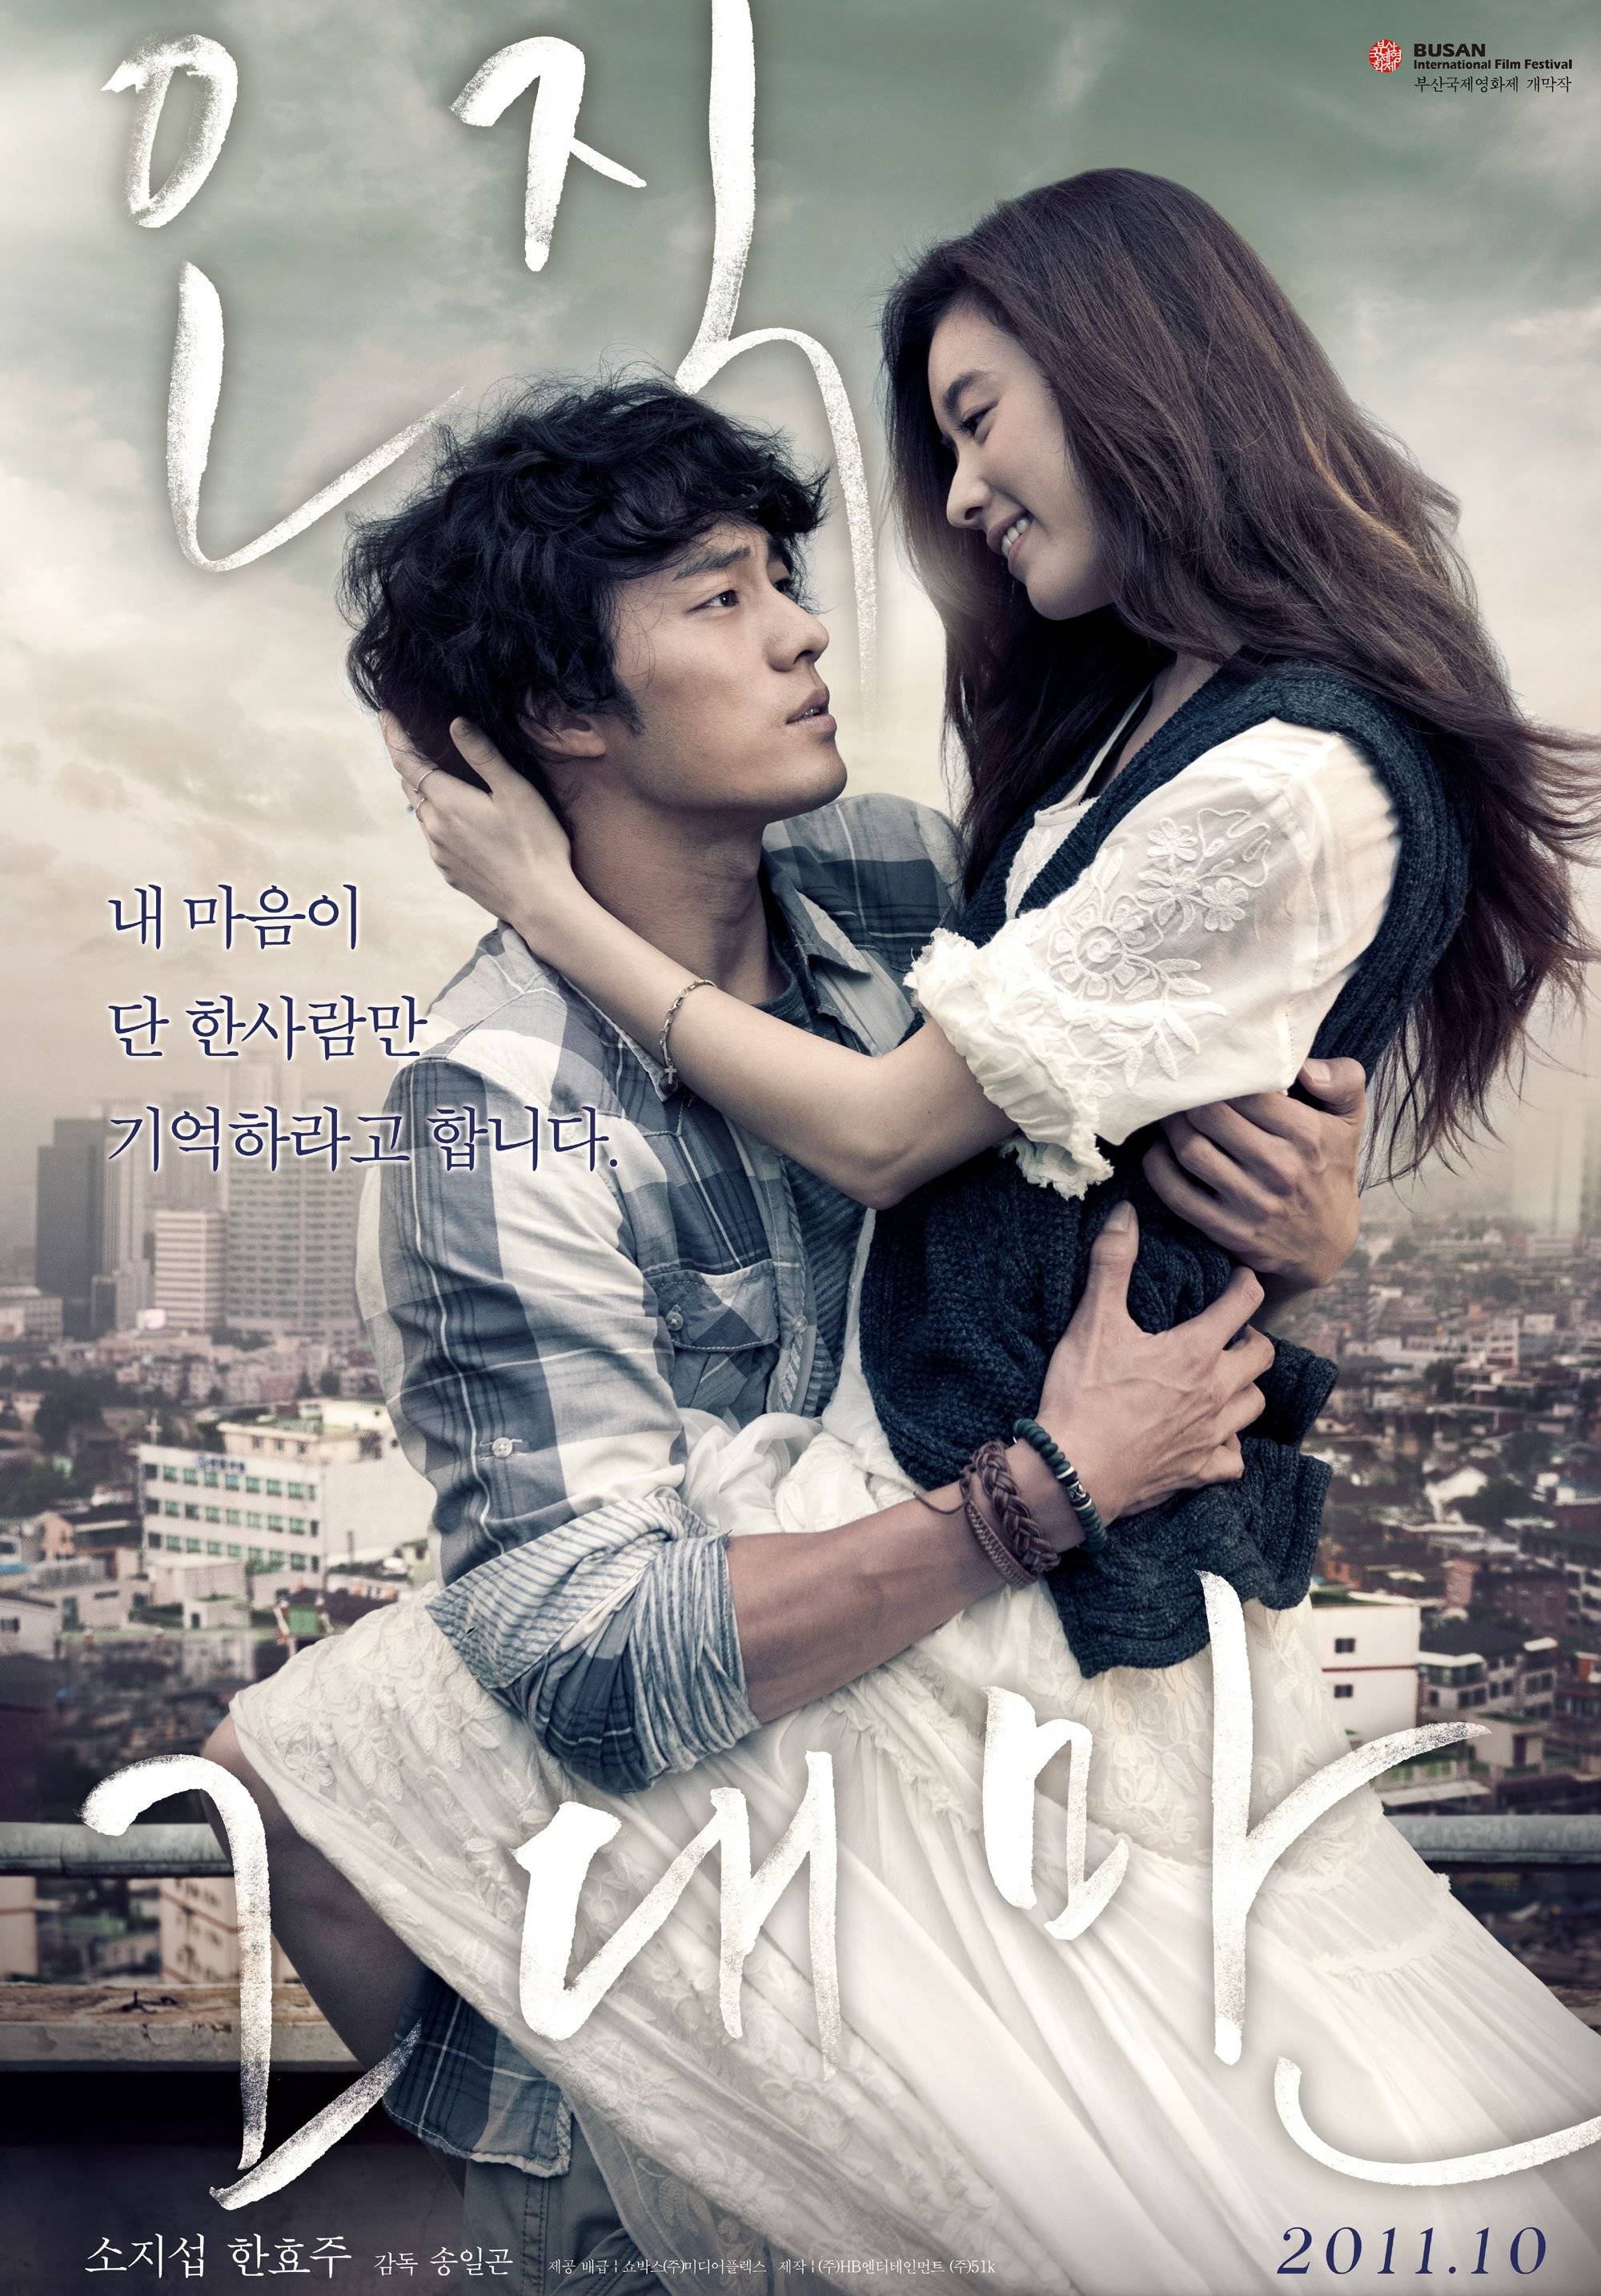 Added new posters for the Korean movie "Always" HanCinema